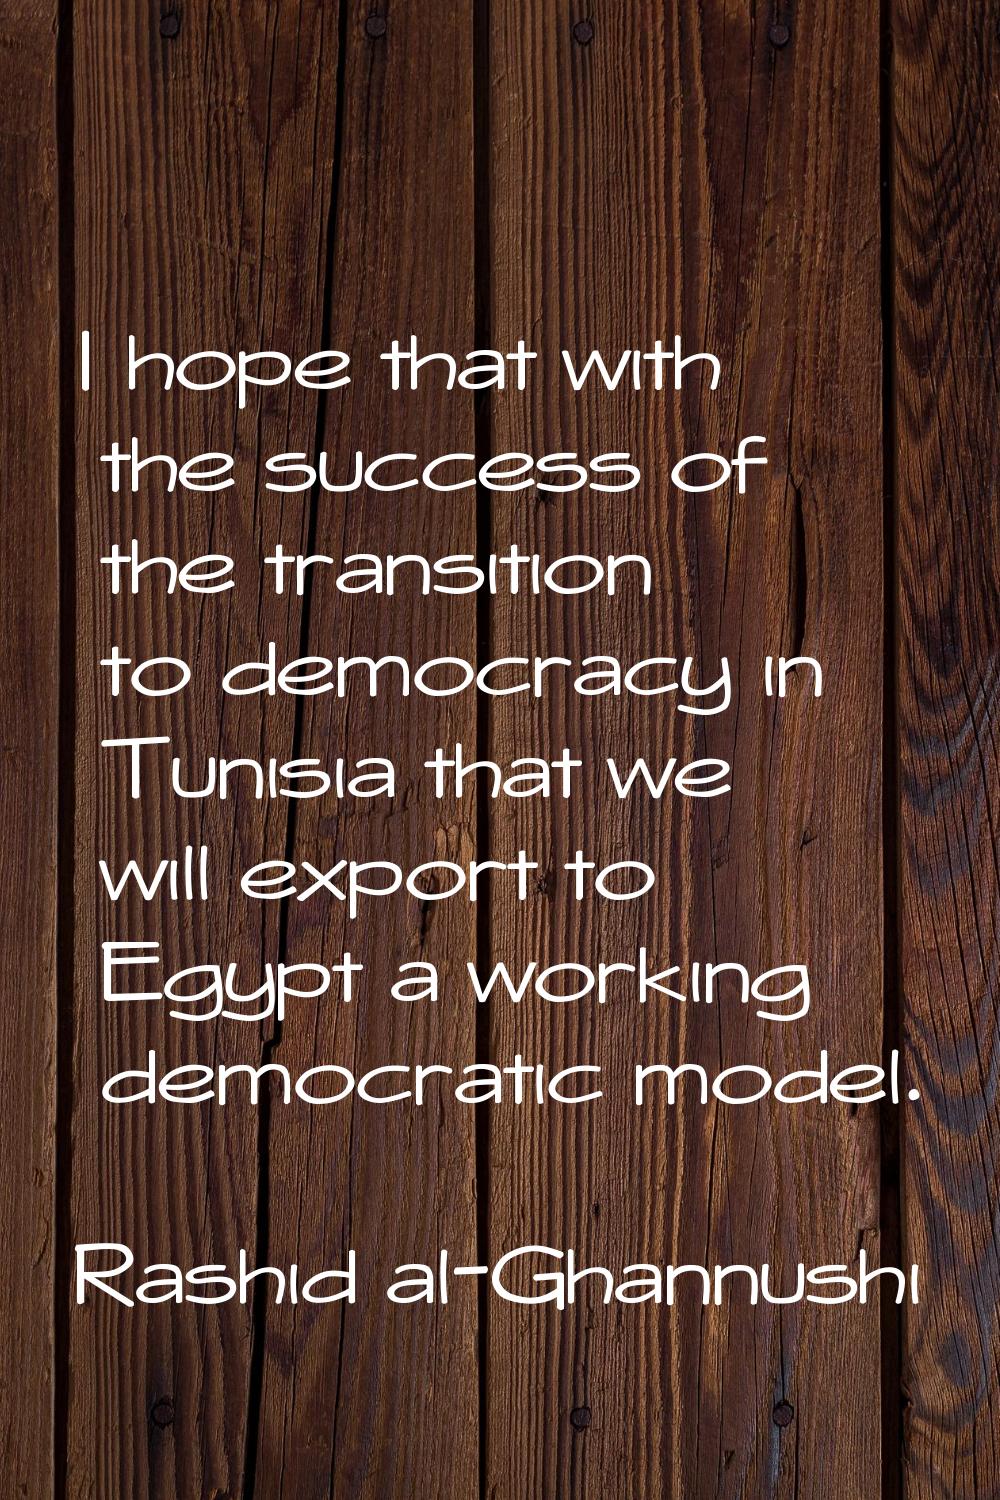 I hope that with the success of the transition to democracy in Tunisia that we will export to Egypt